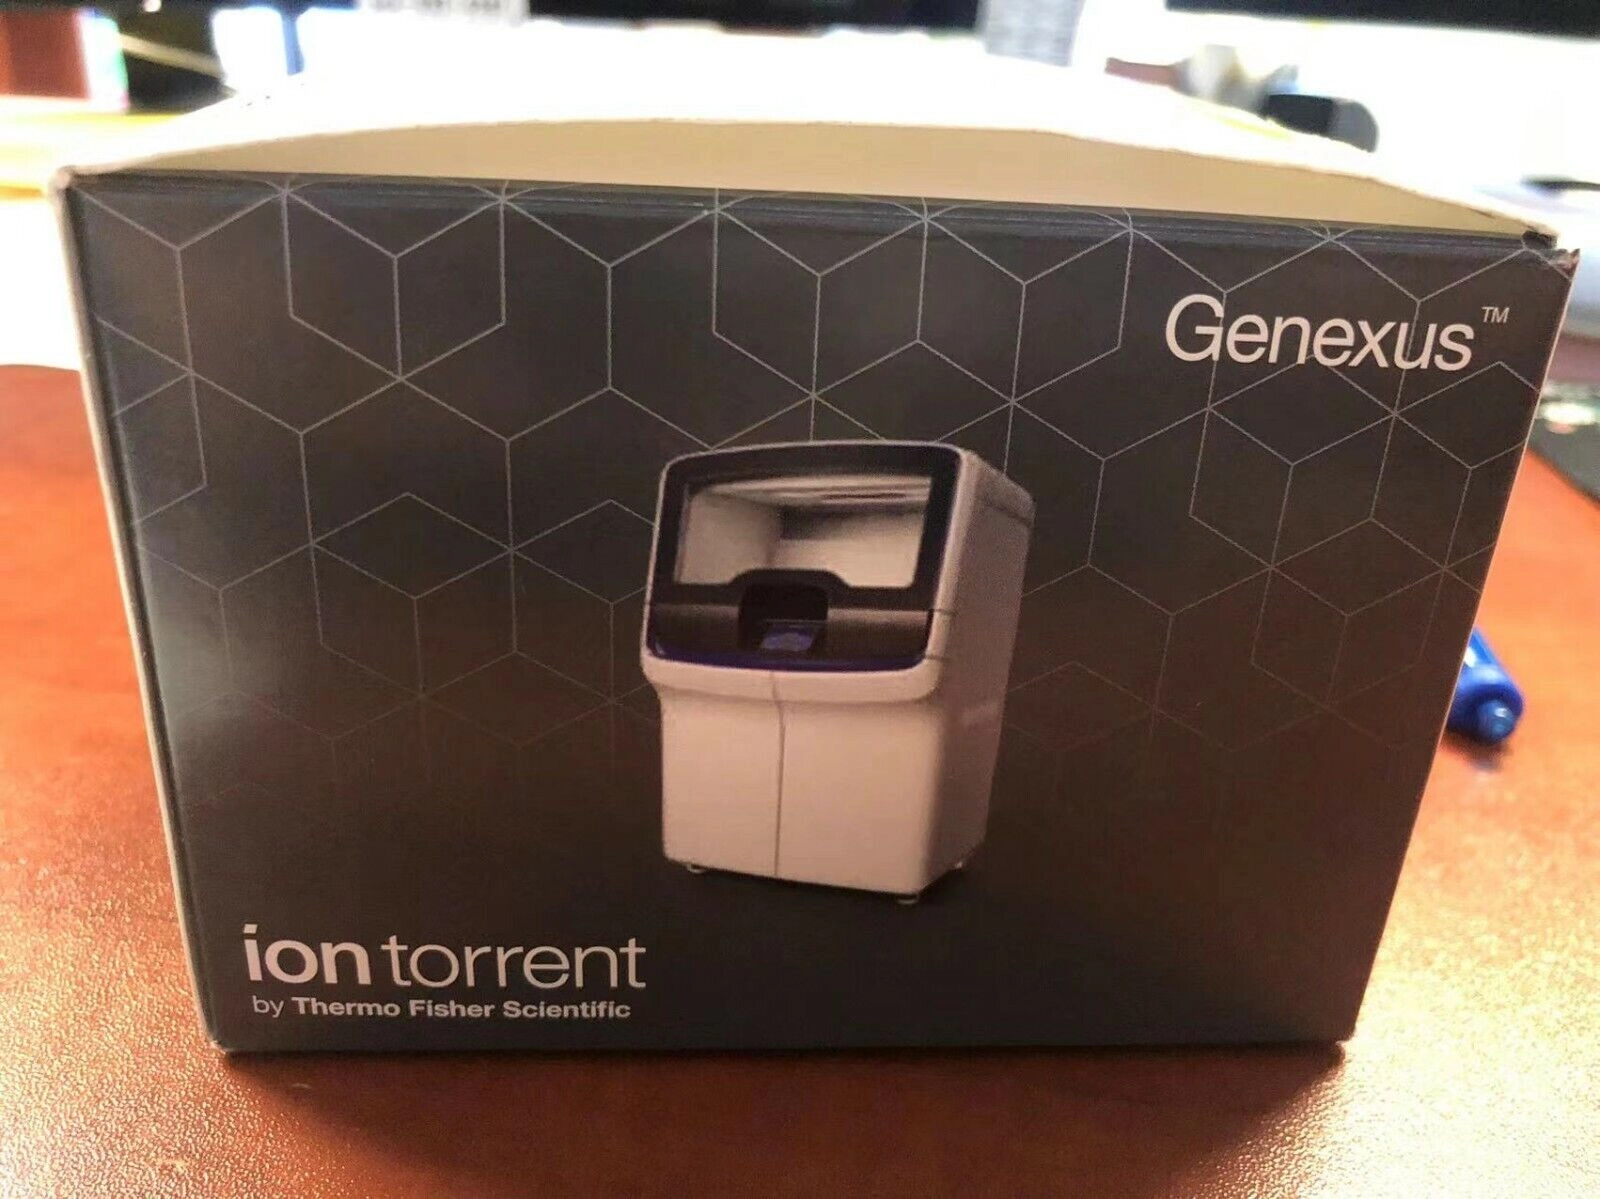 New Thermo Fisher Ion Torrent™ GX5™ and Genexus™ C